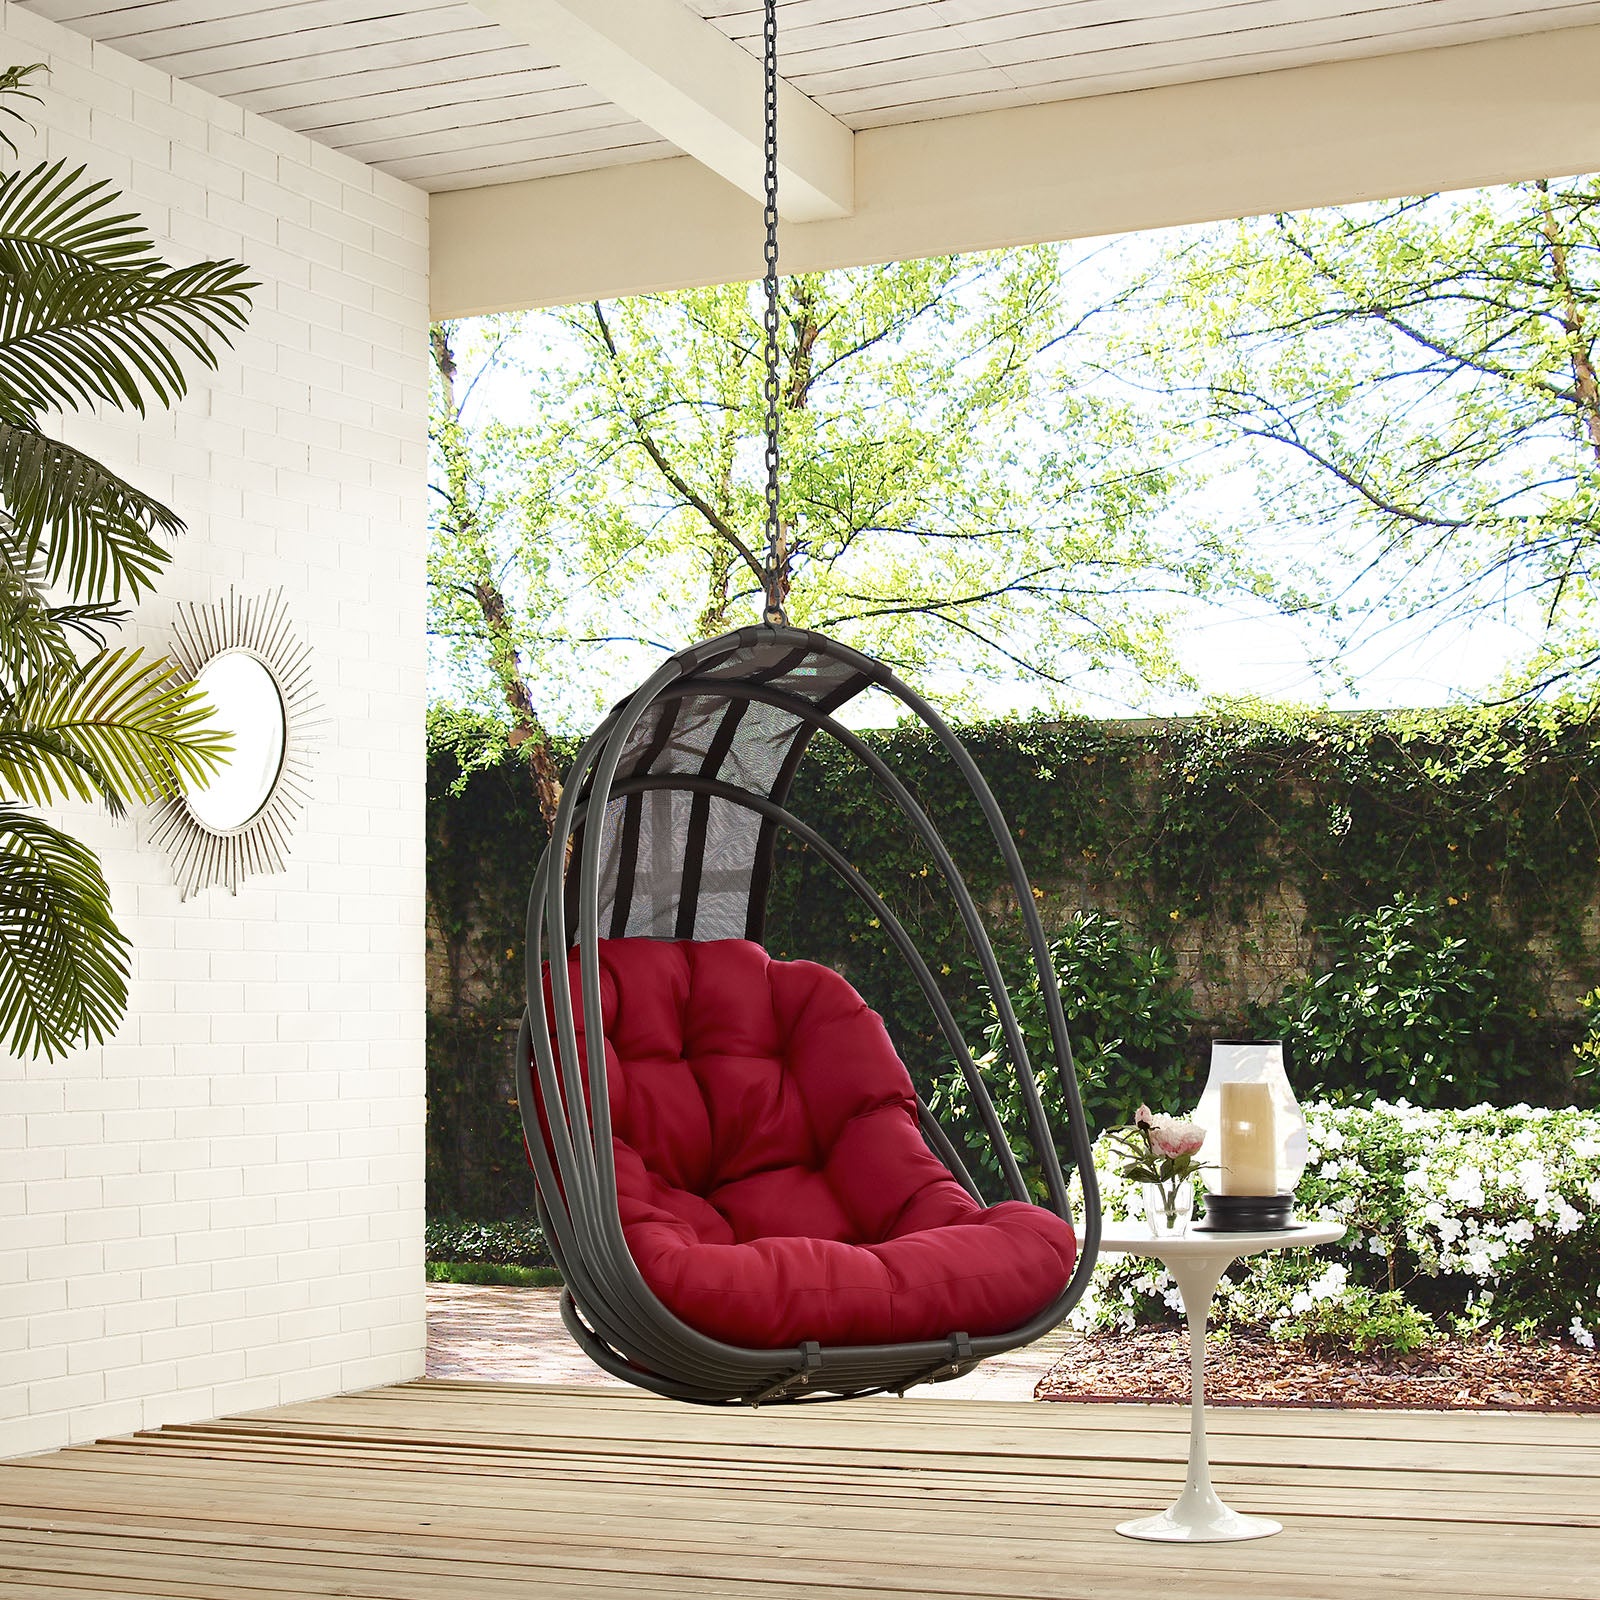 New Launched Swing Hammock Chair Hanging Net Swing for Garden